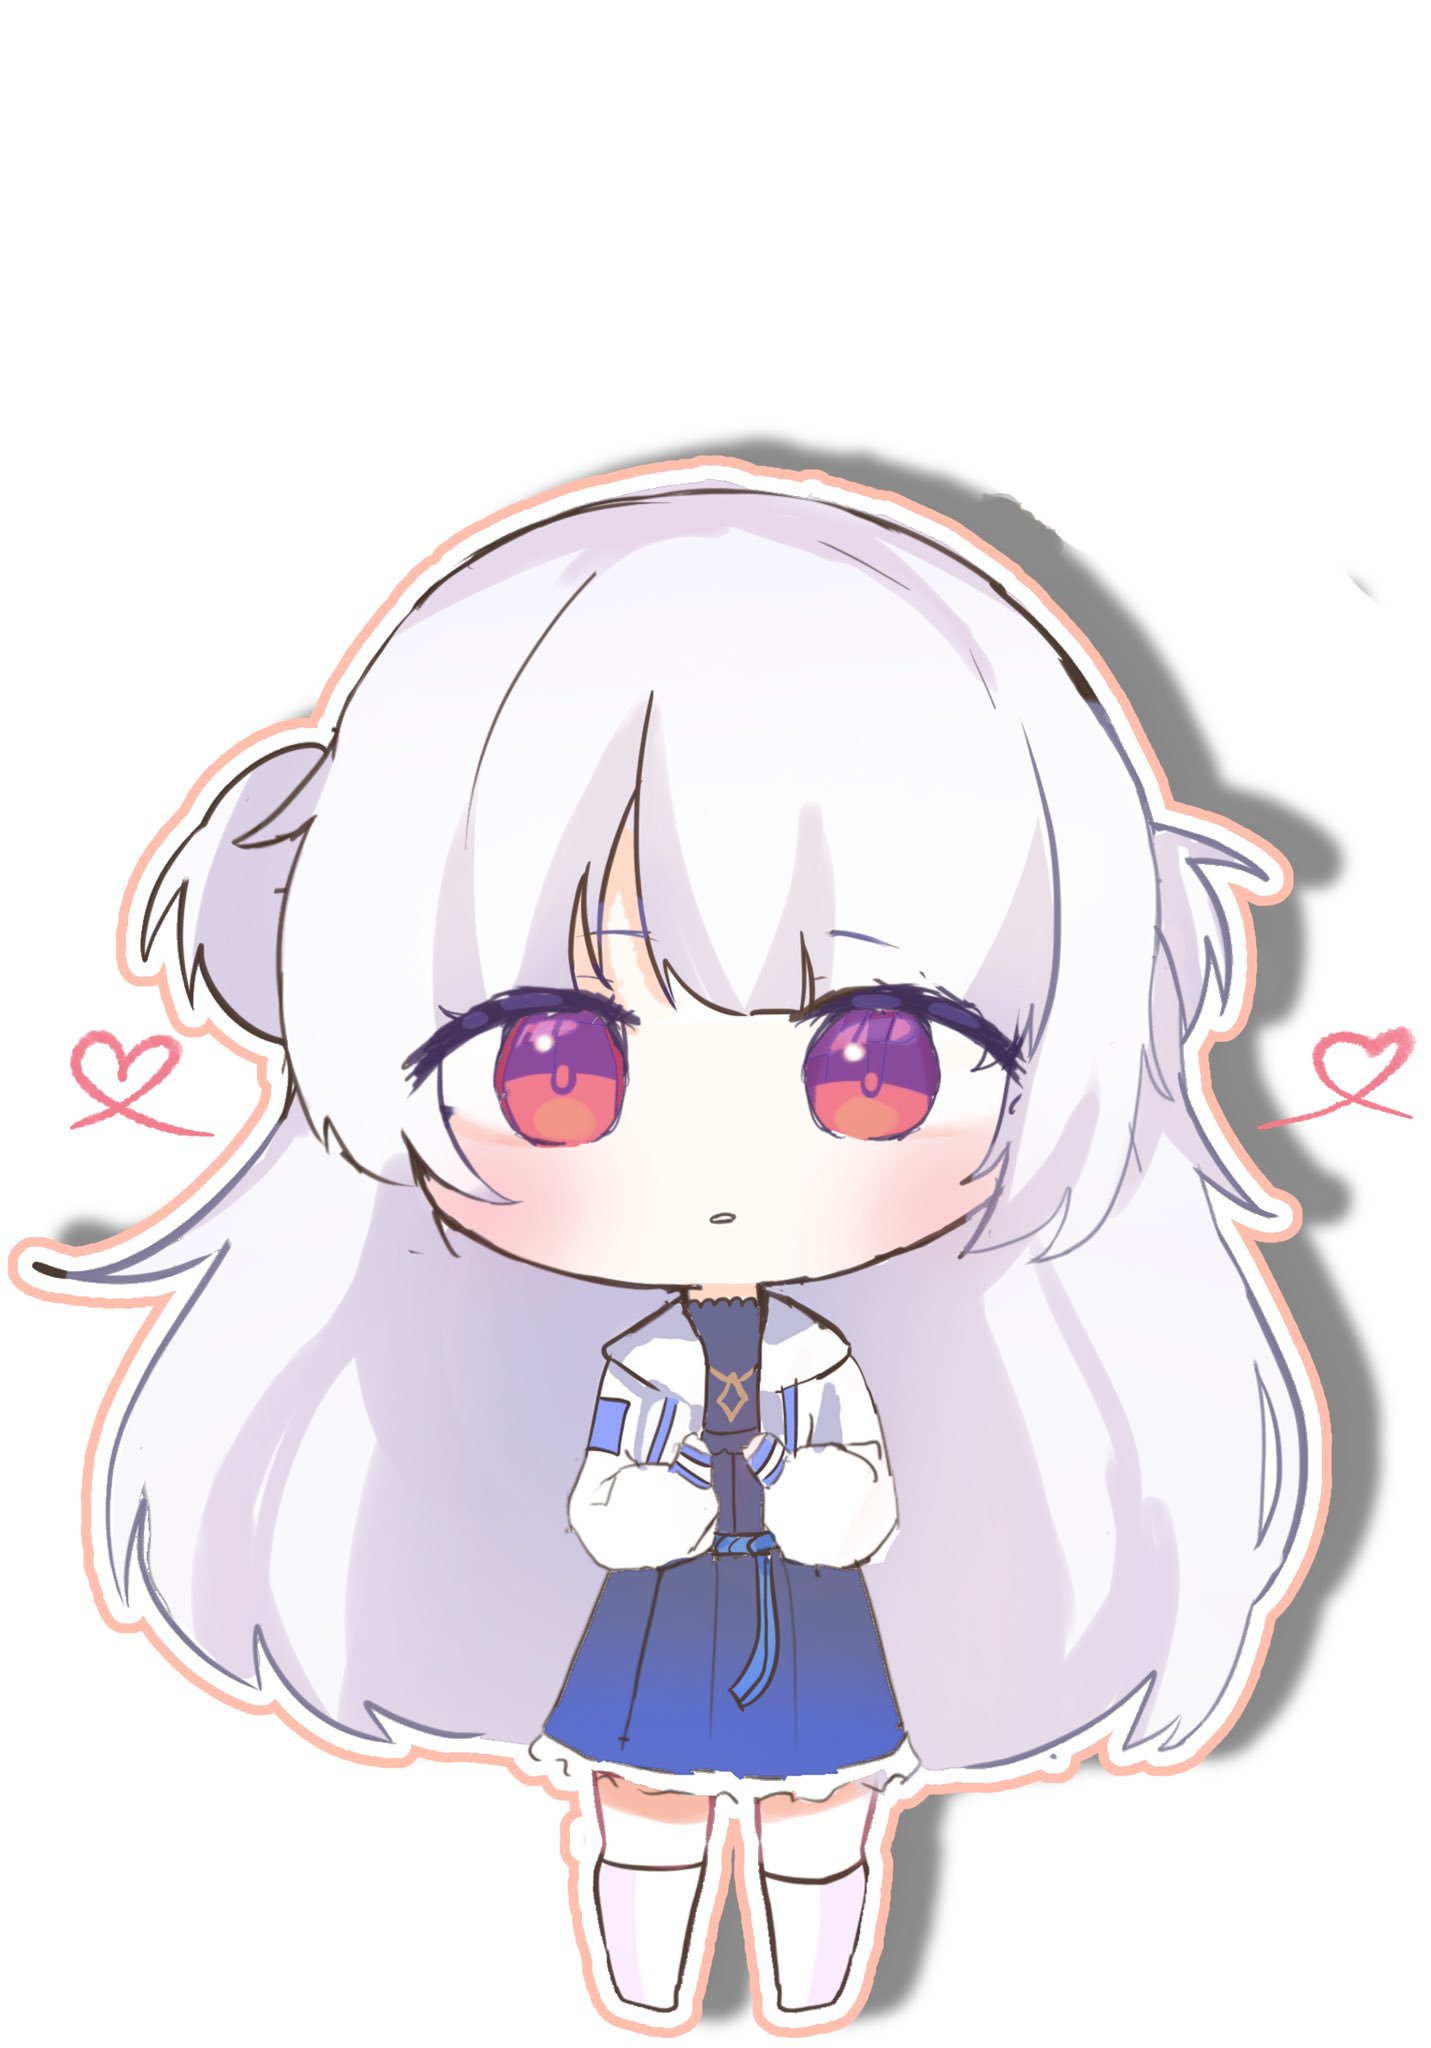 Cute chibi anime art for you by Jennie889